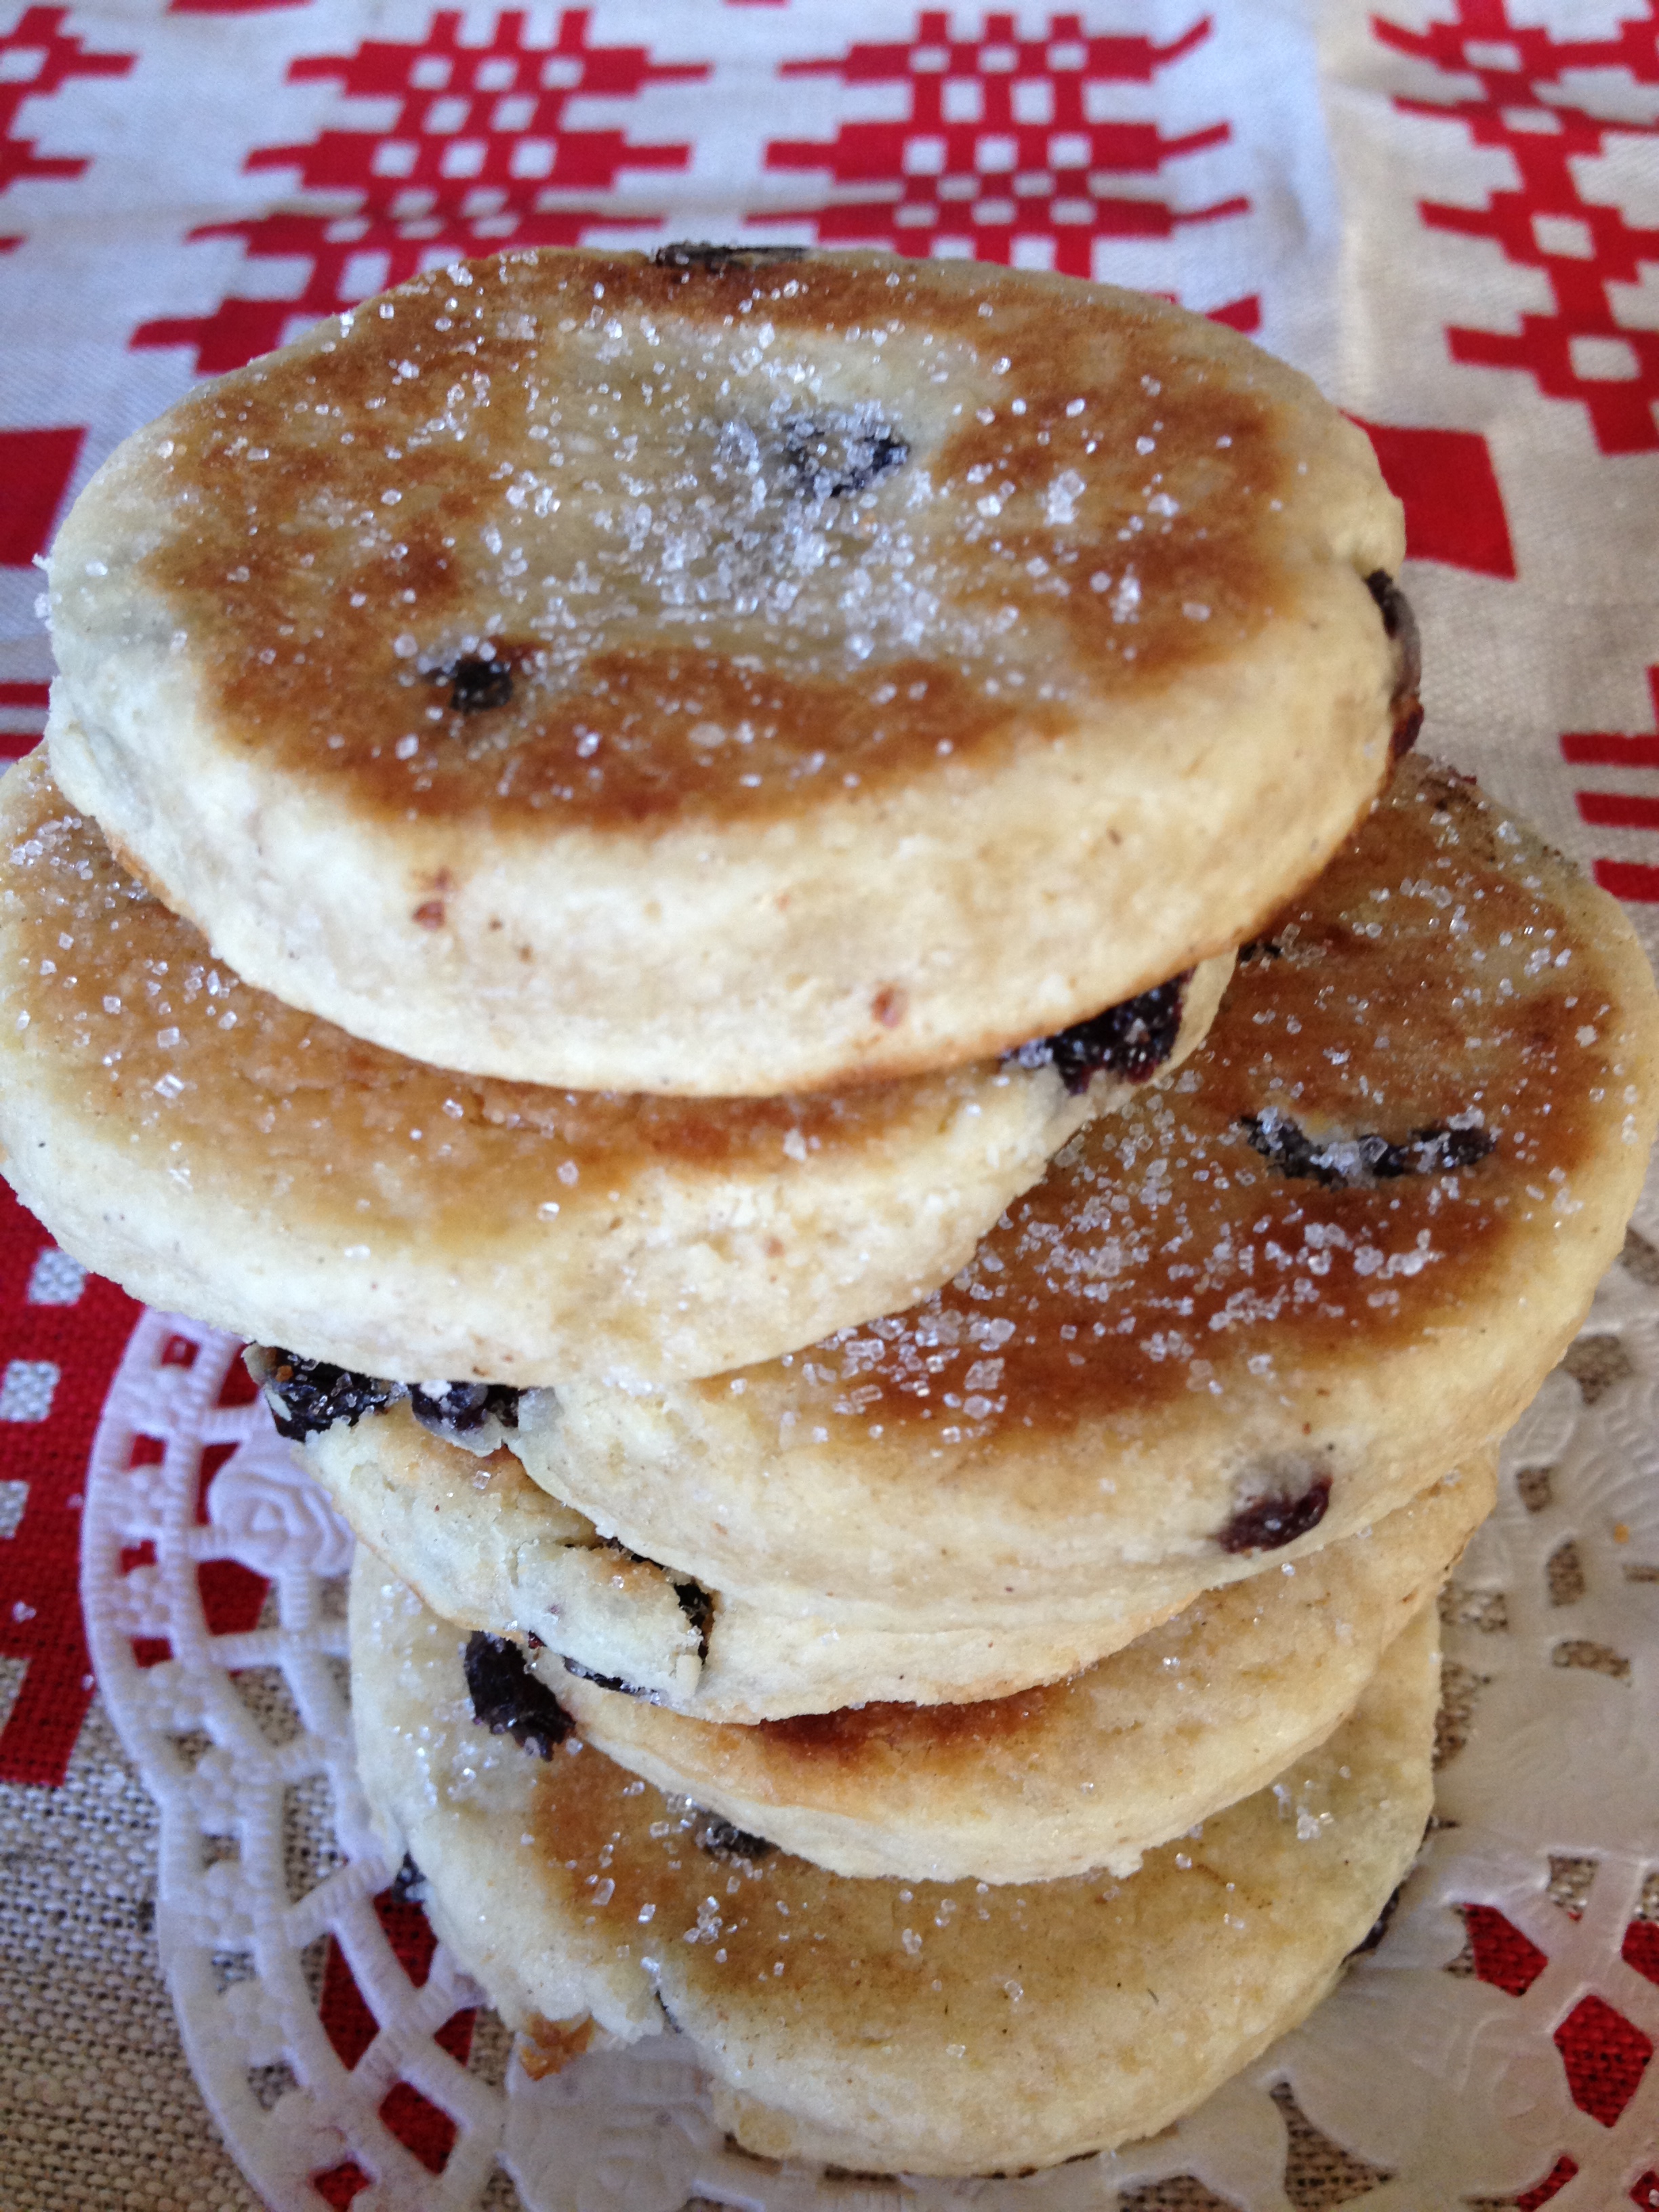 Wine and Welsh Cakes Evening! – Event to meet other Anglophones